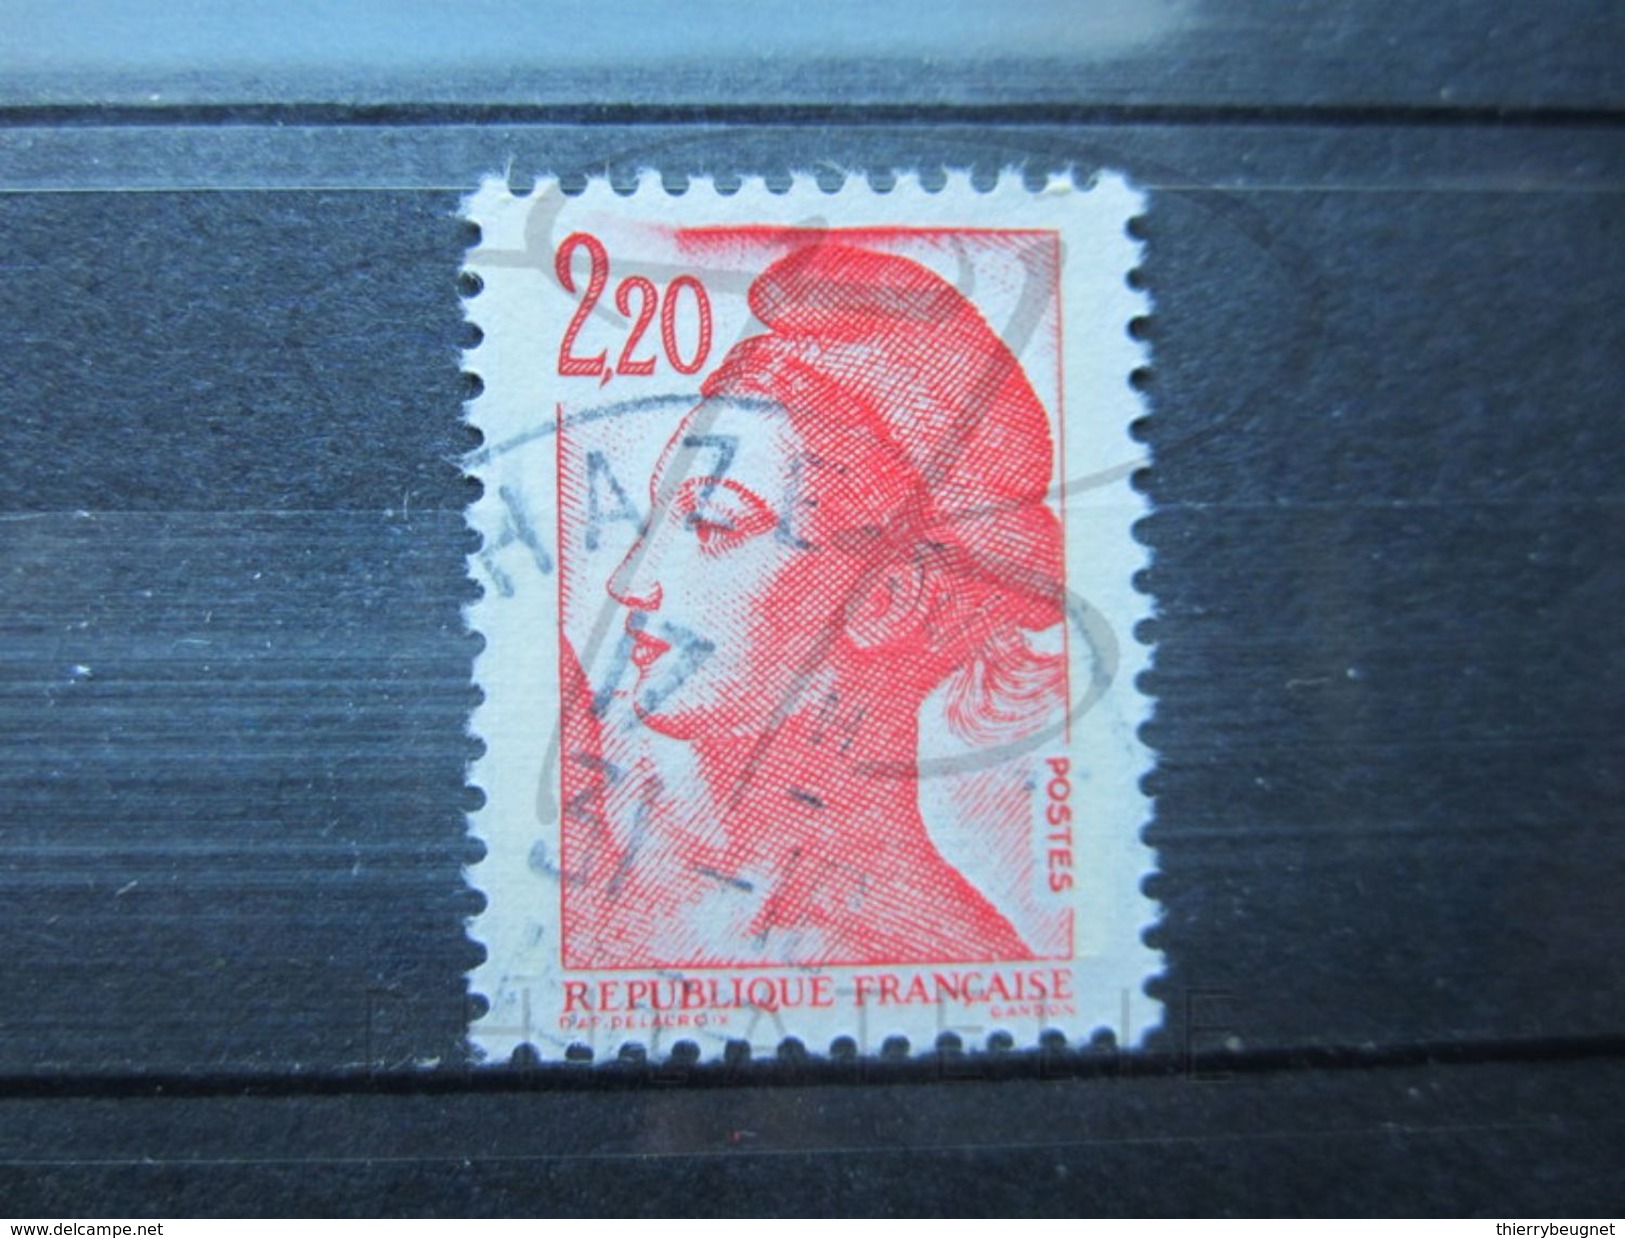 VEND BEAU TIMBRE DE FRANCE N° 2376 , AVEC MACULAGE !!! (b) - Used Stamps